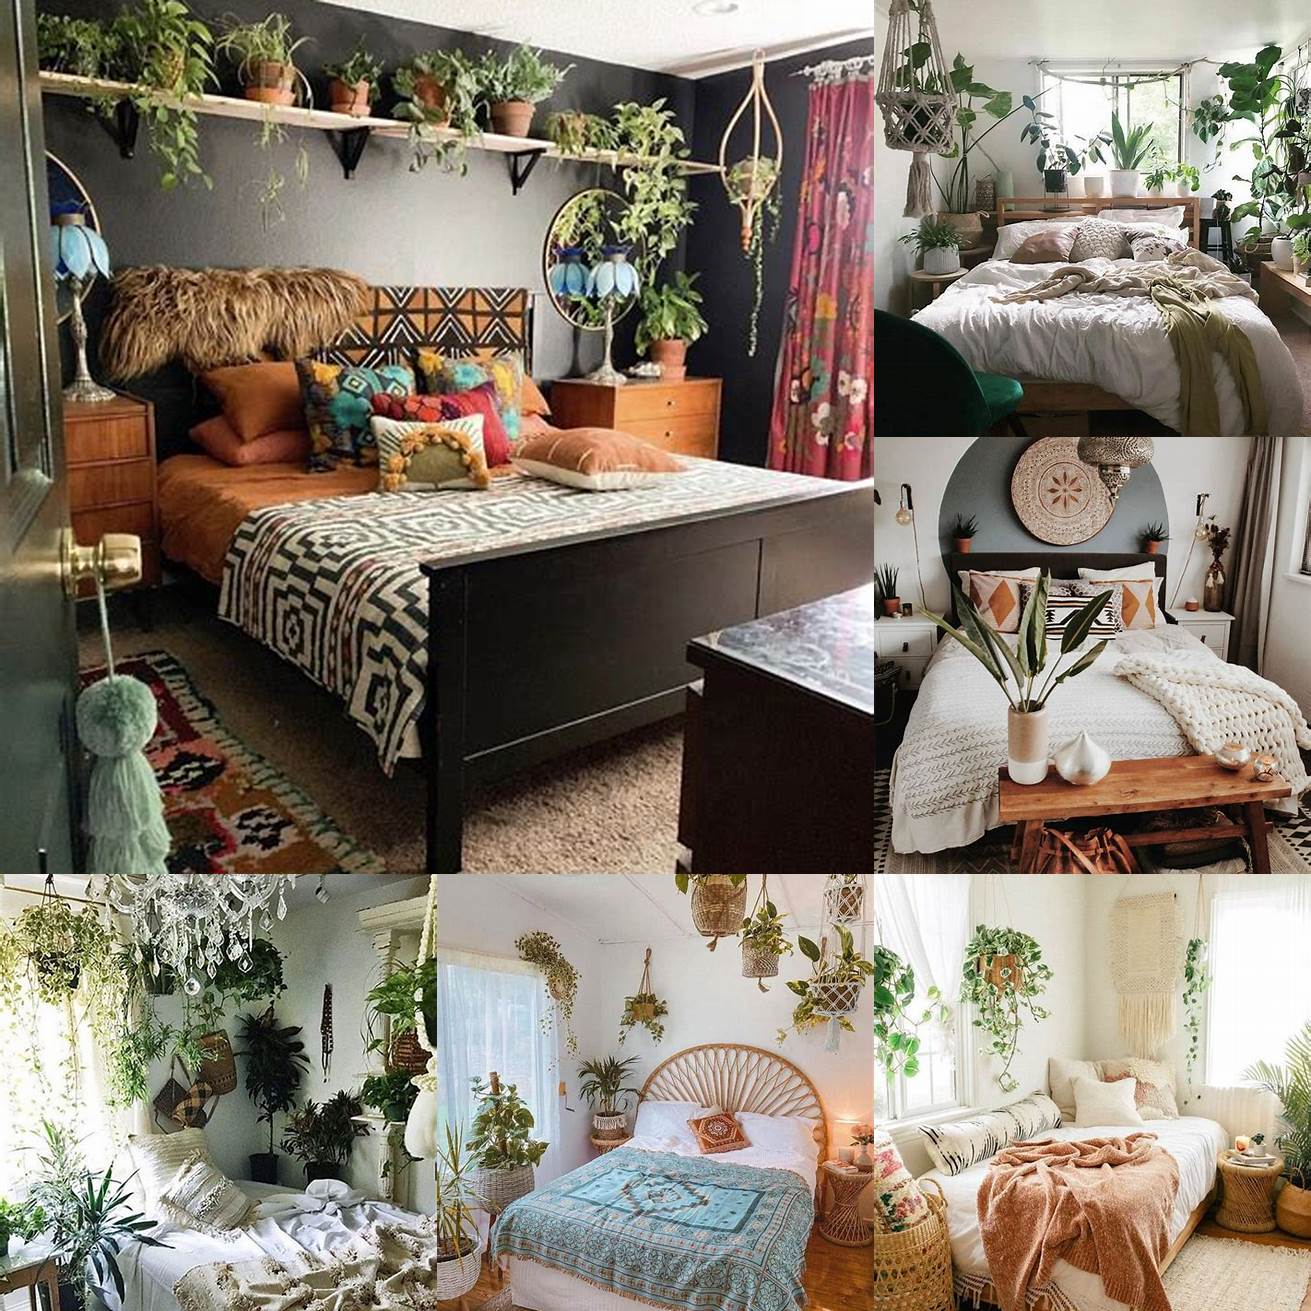 This boho-inspired bedroom includes plants and a tapestry to create a relaxed and laid-back atmosphere